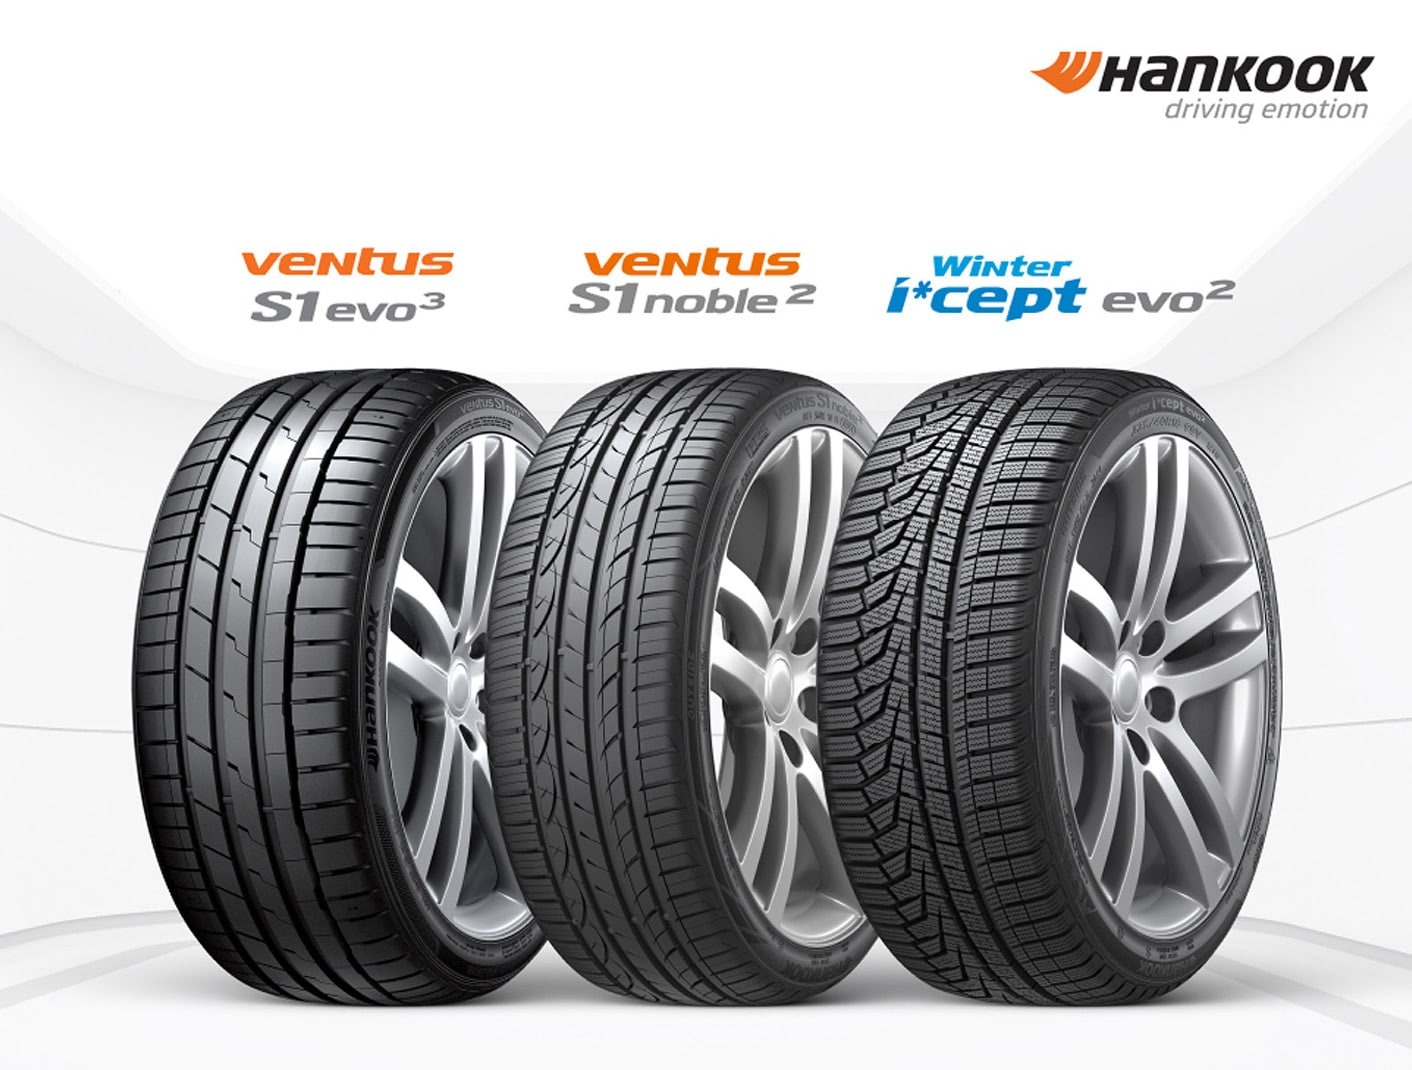 Hankook tires as original equipment for the luxury class of a premium car manufacturer